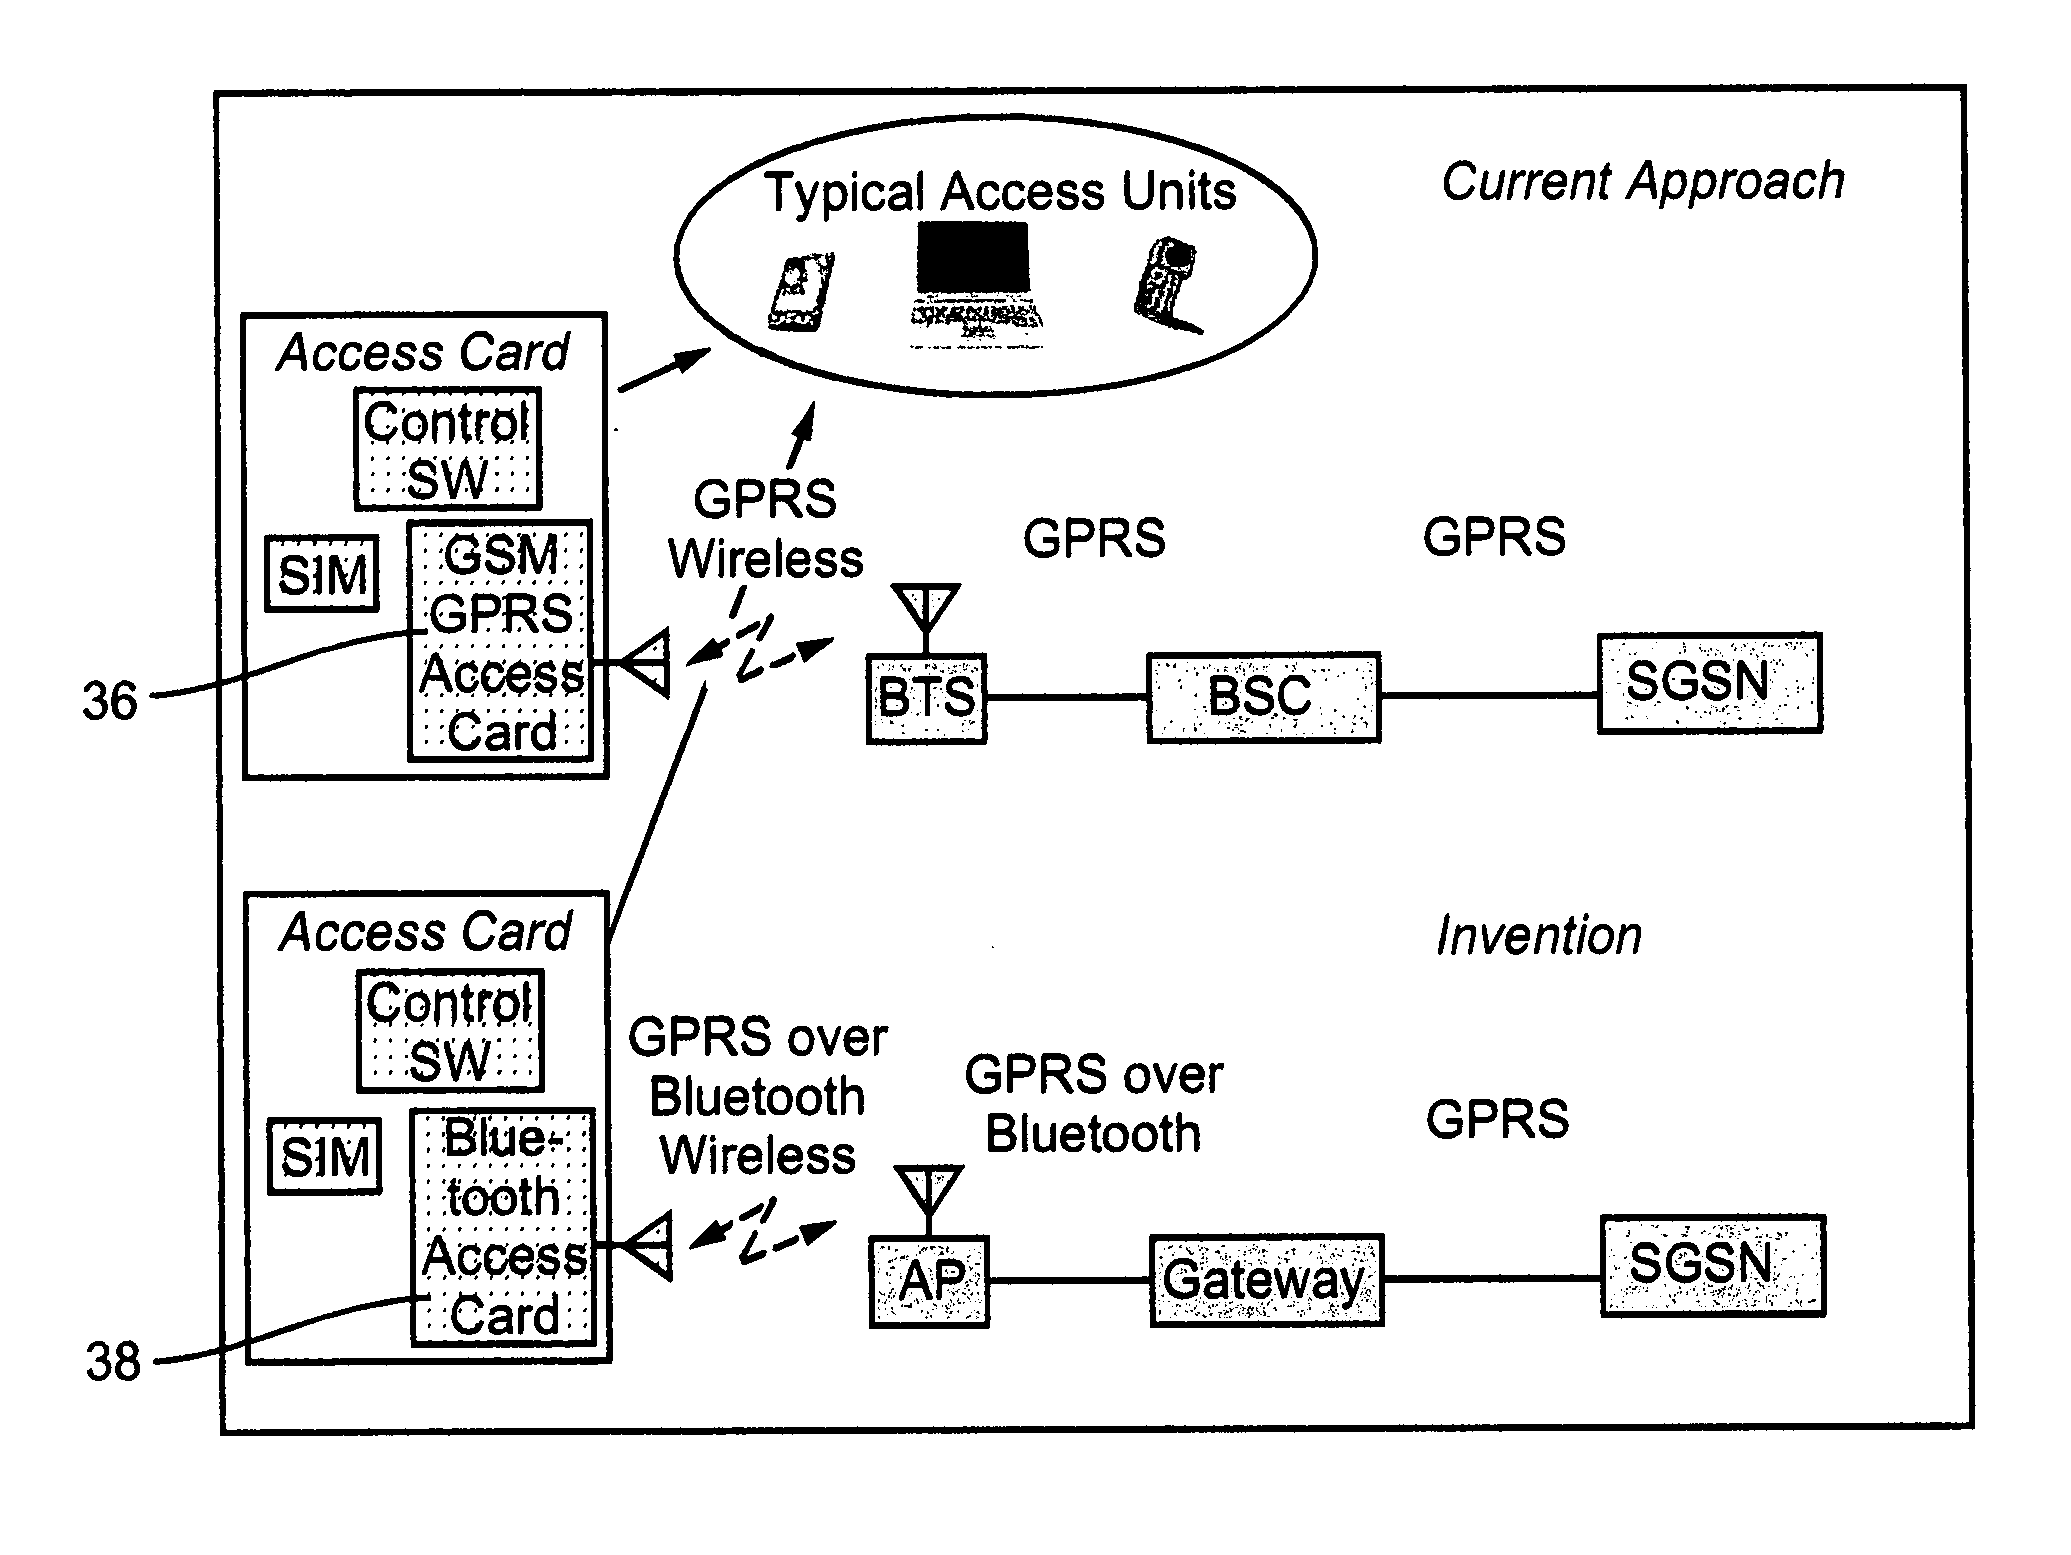 Access to plmn networks for non-plmn devices, and to issues arising in interfaces in general between plmn and non-plmn networks